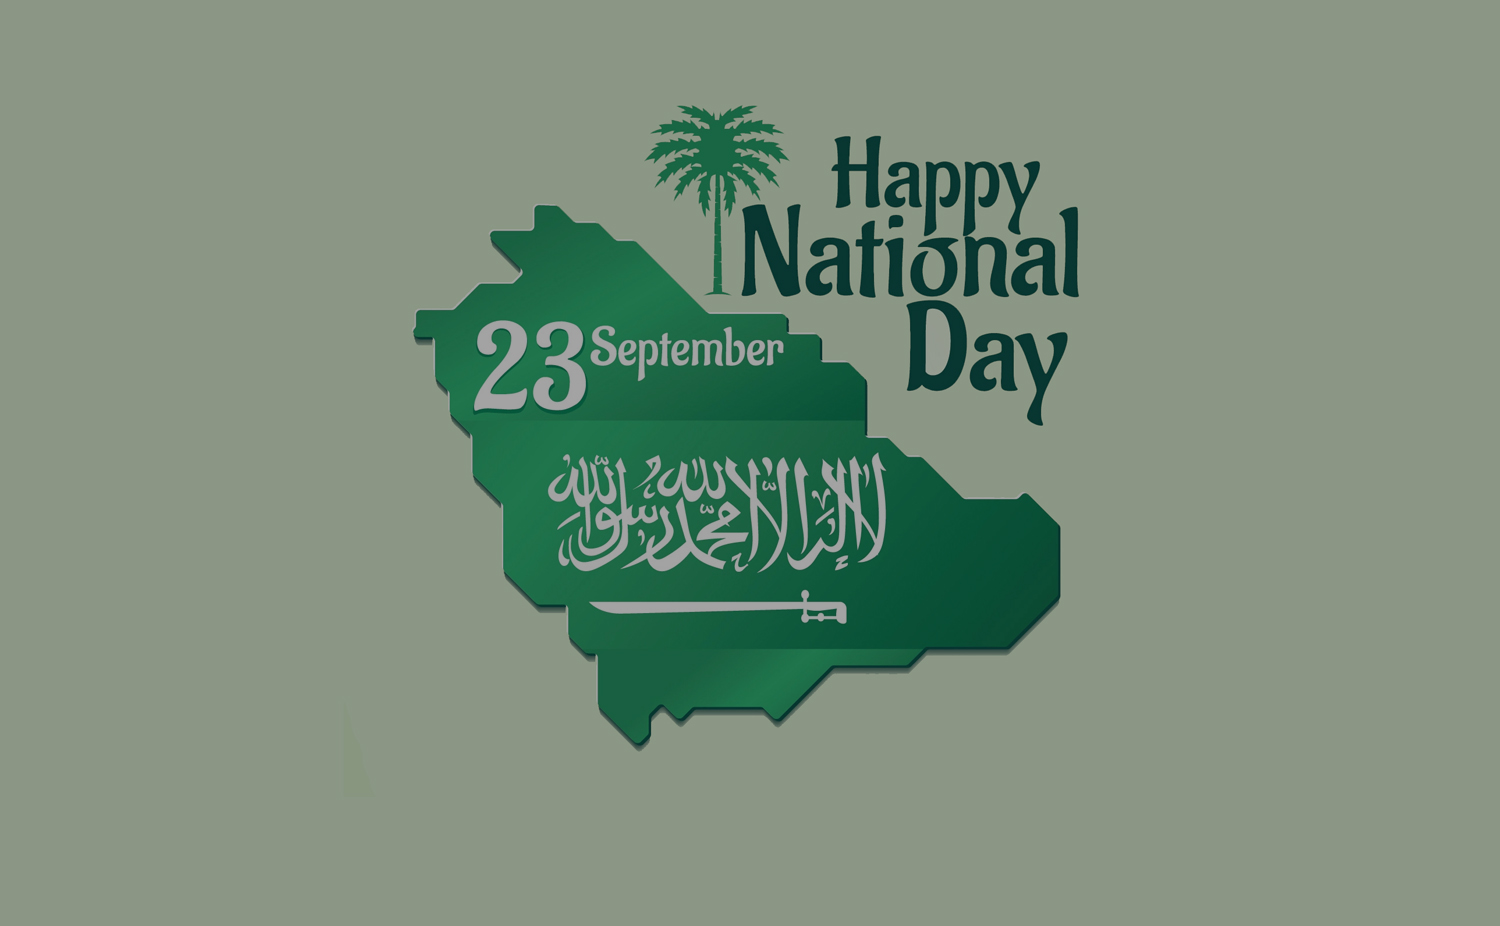 BrandPartners family<br/><span> wishes you a happy and safe national day</span>